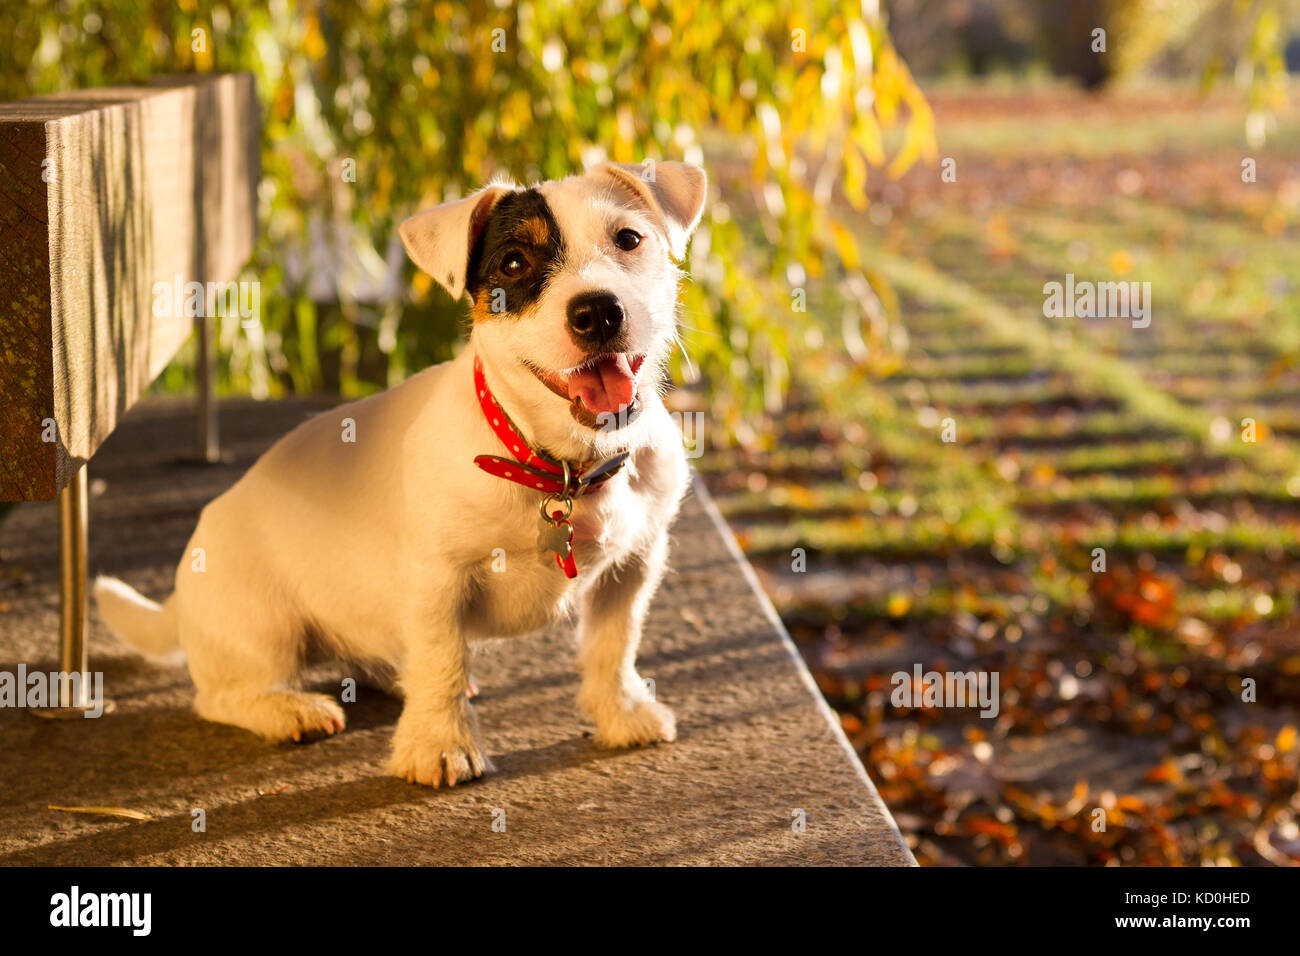 Animal portrait of jack russell looking at camera Stock Photo